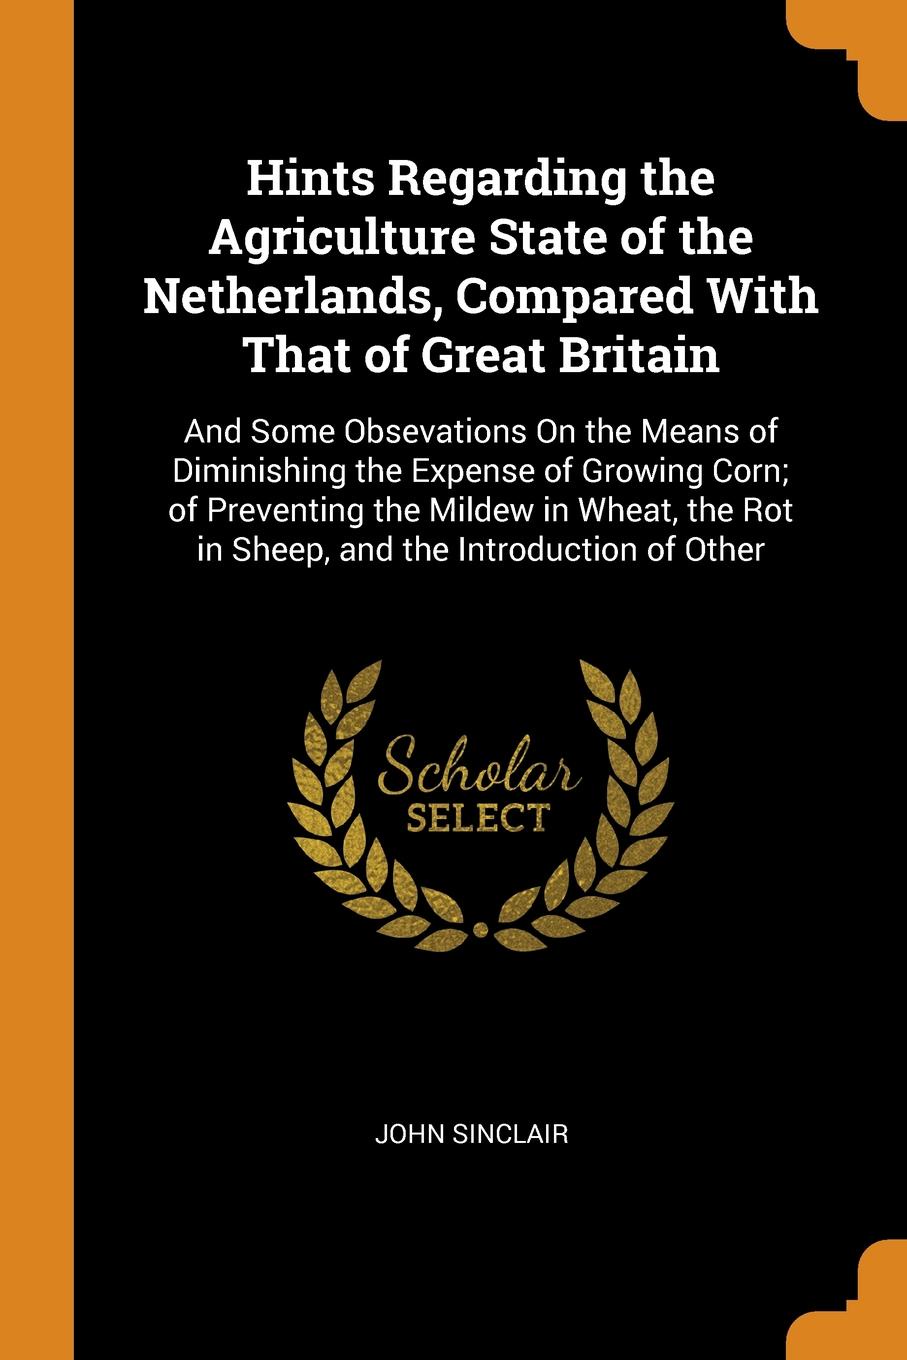 Hints Regarding the Agriculture State of the Netherlands, Compared With That of Great Britain. And Some Obsevations On the Means of Diminishing the Expense of Growing Corn; of Preventing the Mildew in Wheat, the Rot in Sheep, and the Introduction ...